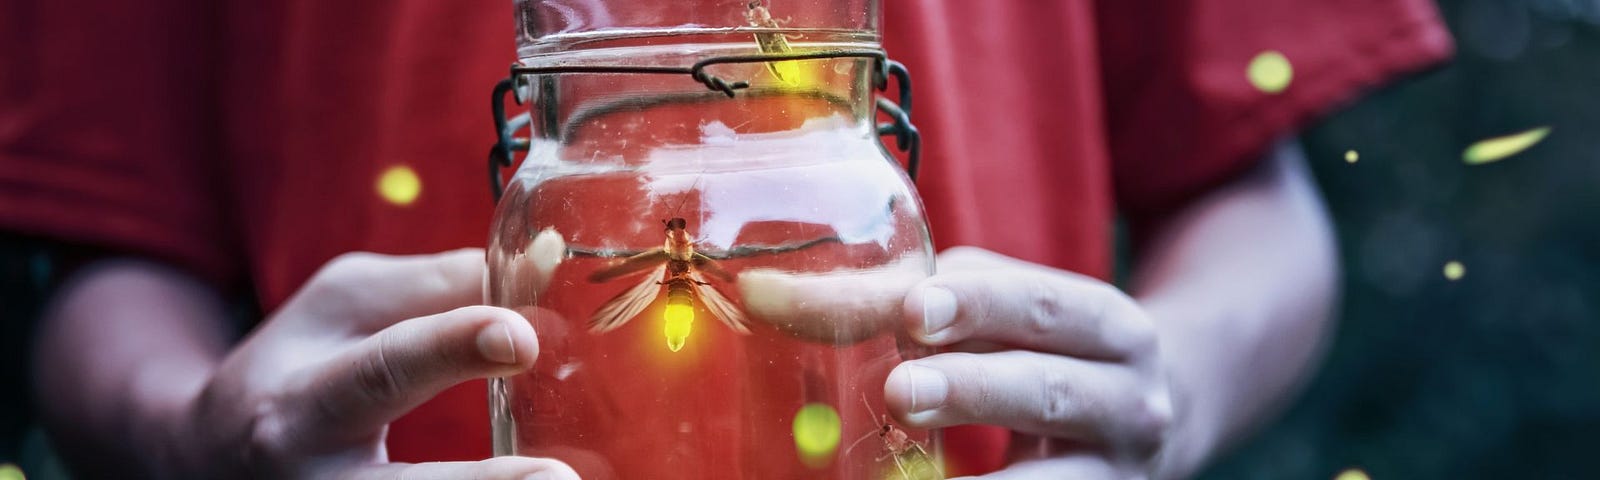 Photo of person holding a jar with fireflies captured inside.